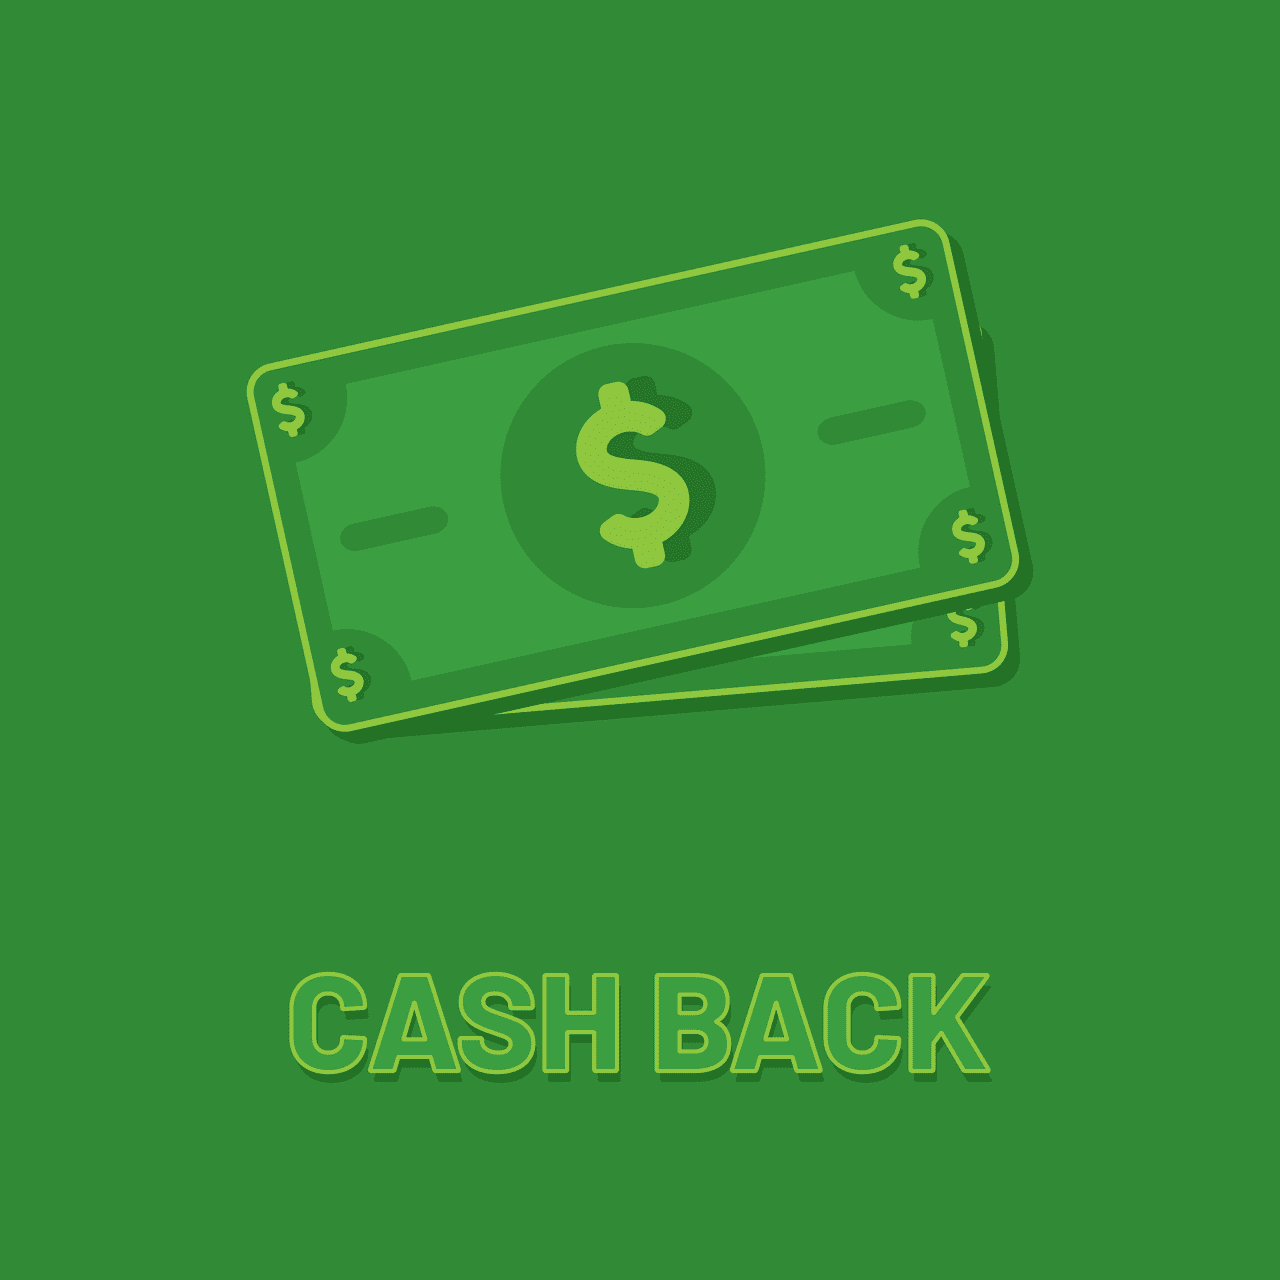 Get Cash Back from Shopping Online